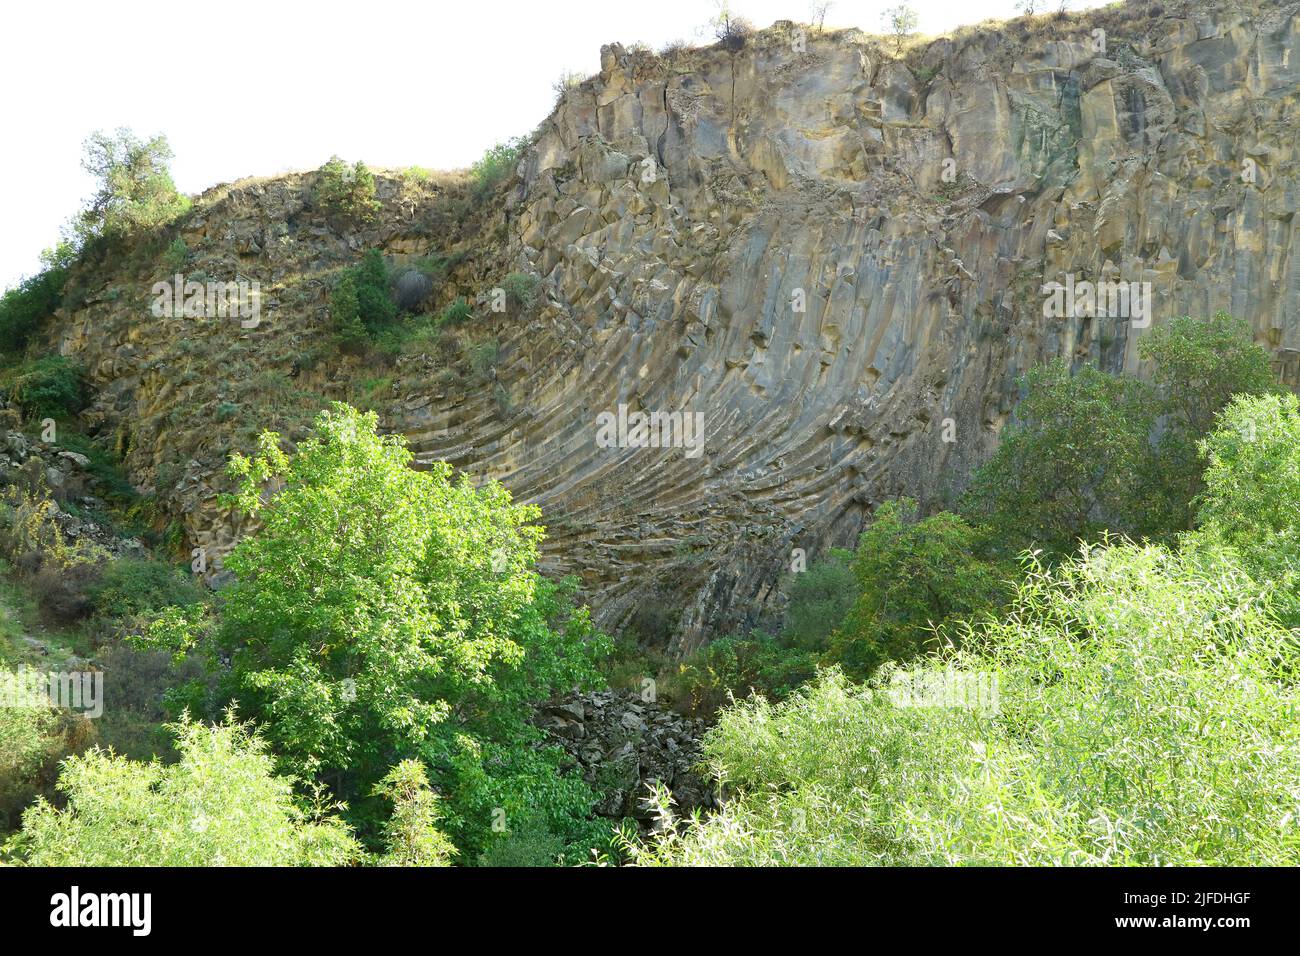 The Symphony of Stones, Incredible Basalt Column Formations Along the Garni Gorge of Armenia Stock Photo